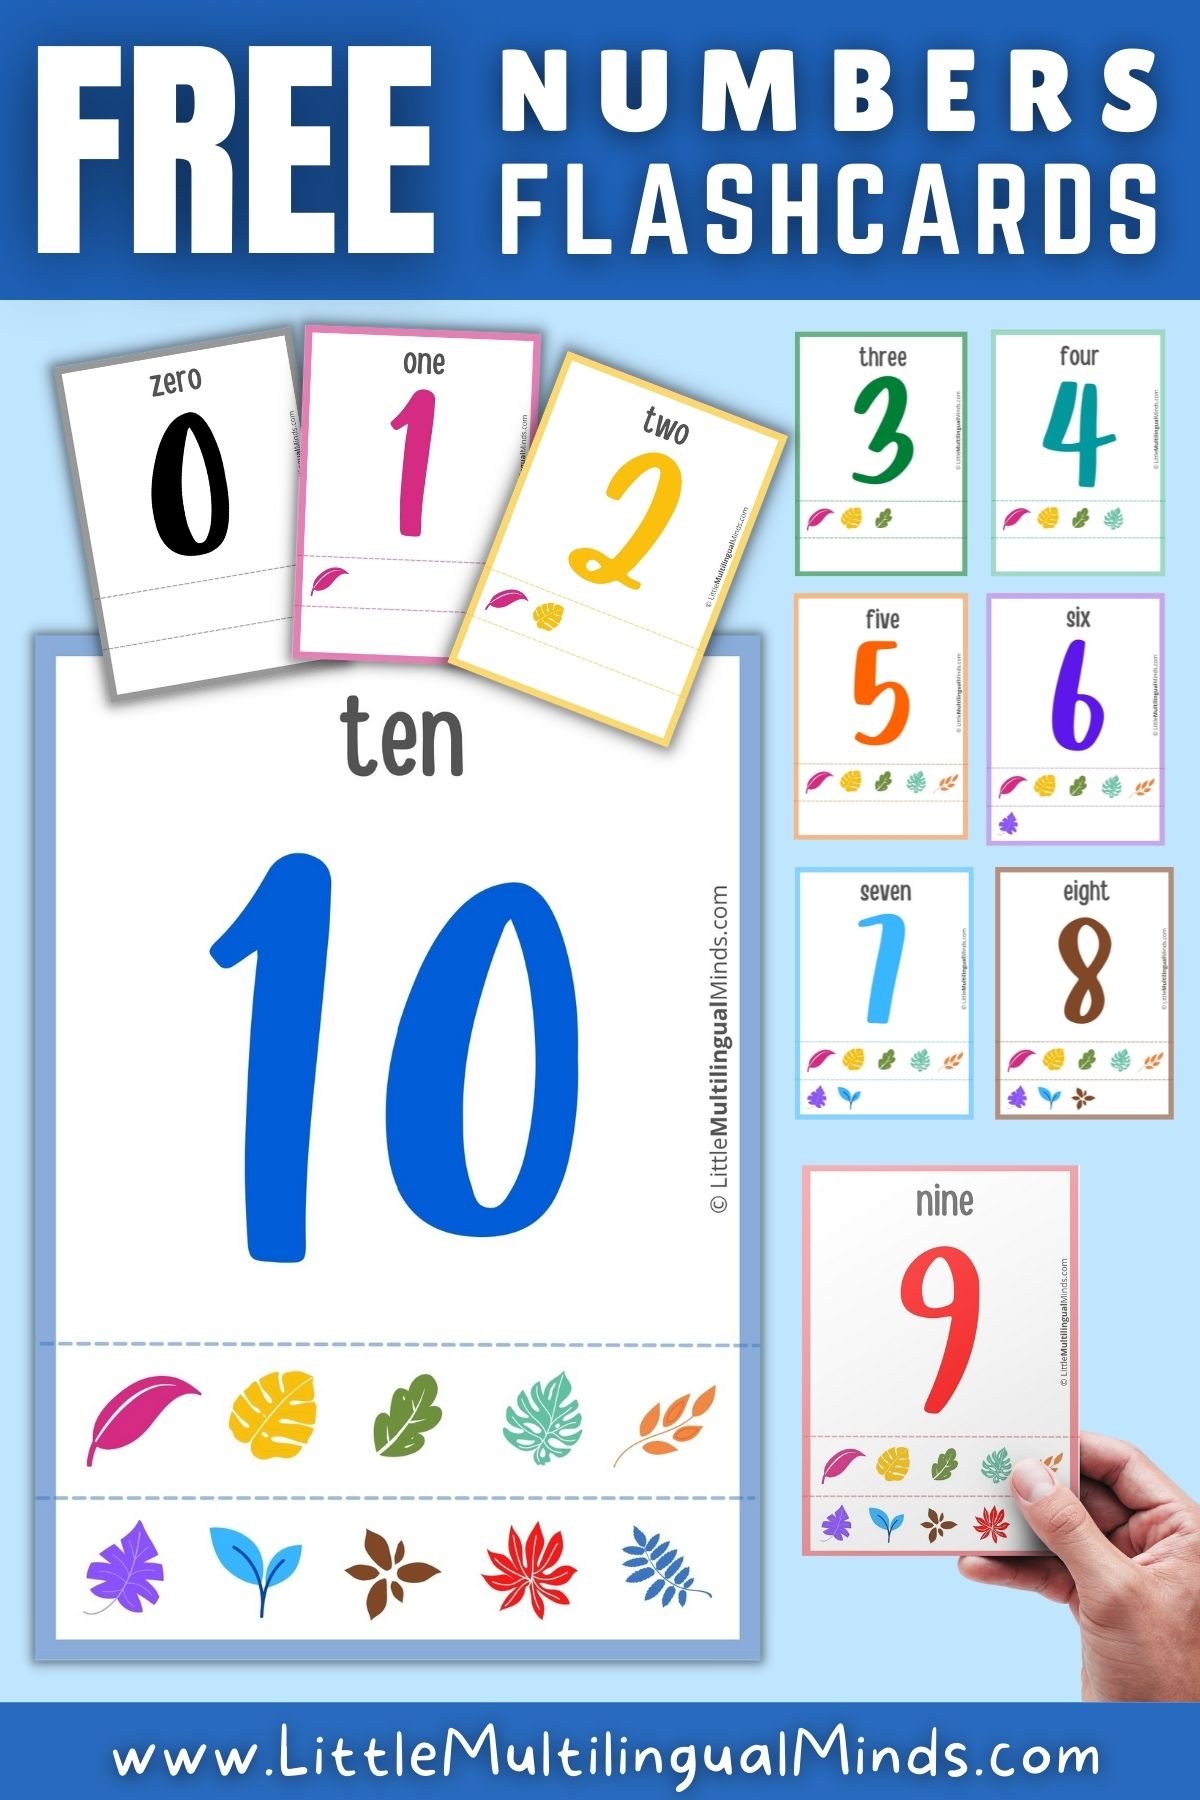 Free Number Flashcards and 16 Fun Number Activities